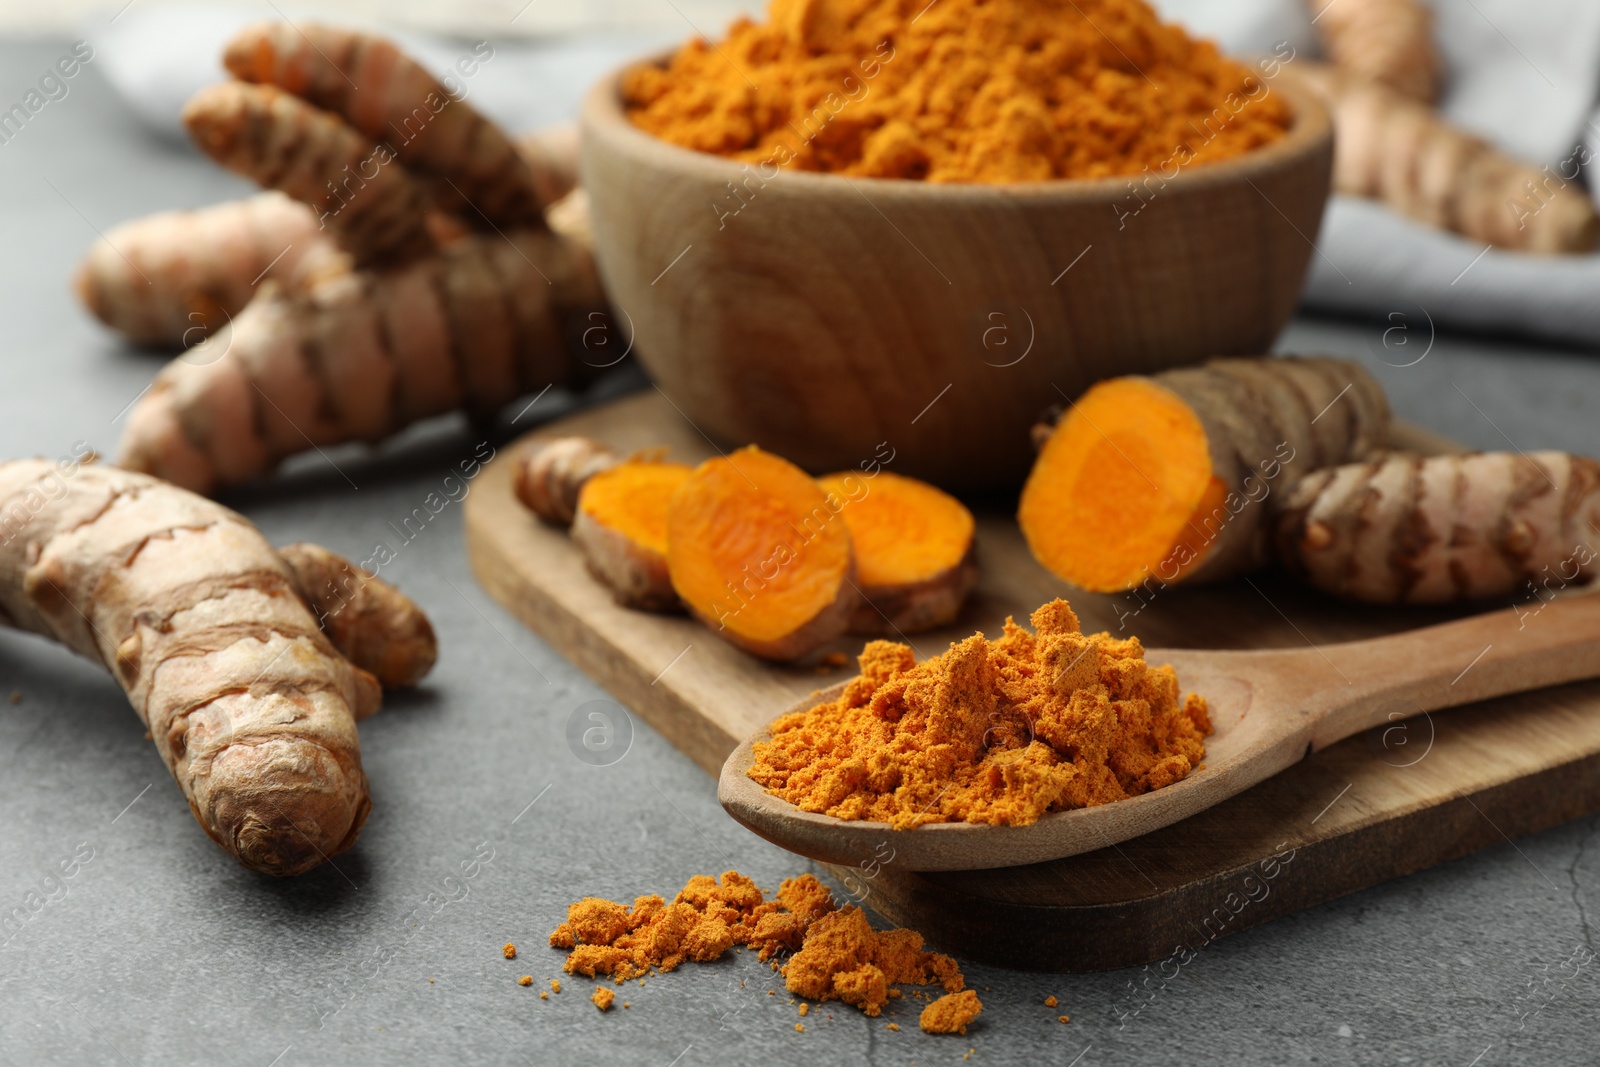 Photo of Aromatic turmeric powder and raw roots on grey table, closeup